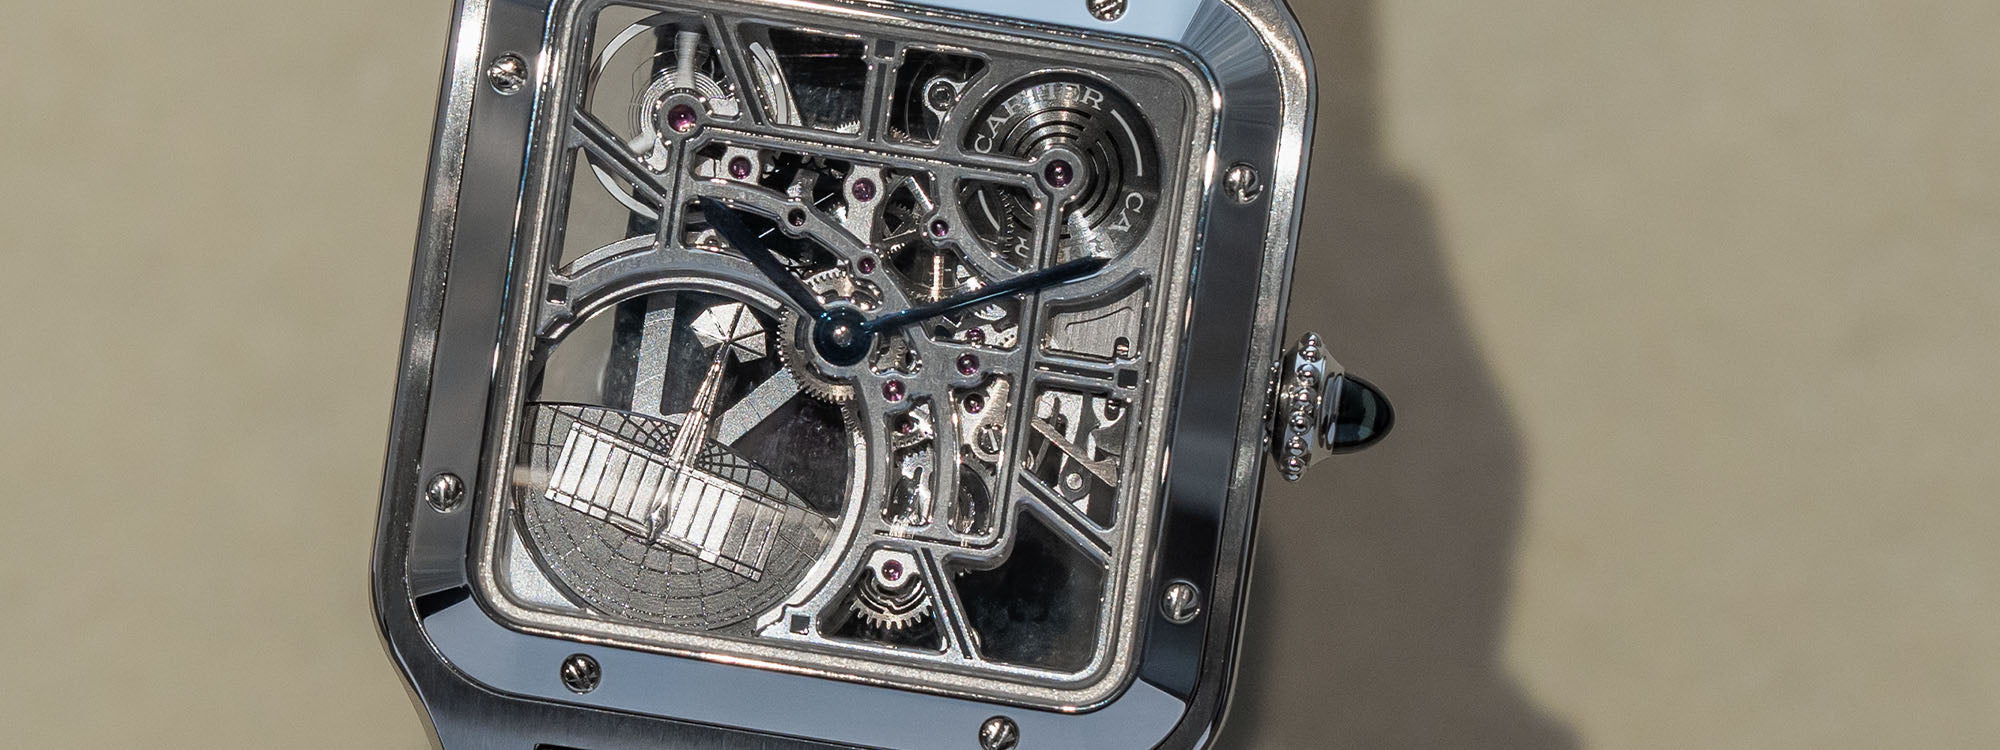 Next Level: Jewelled Watches for Men Who Have it All